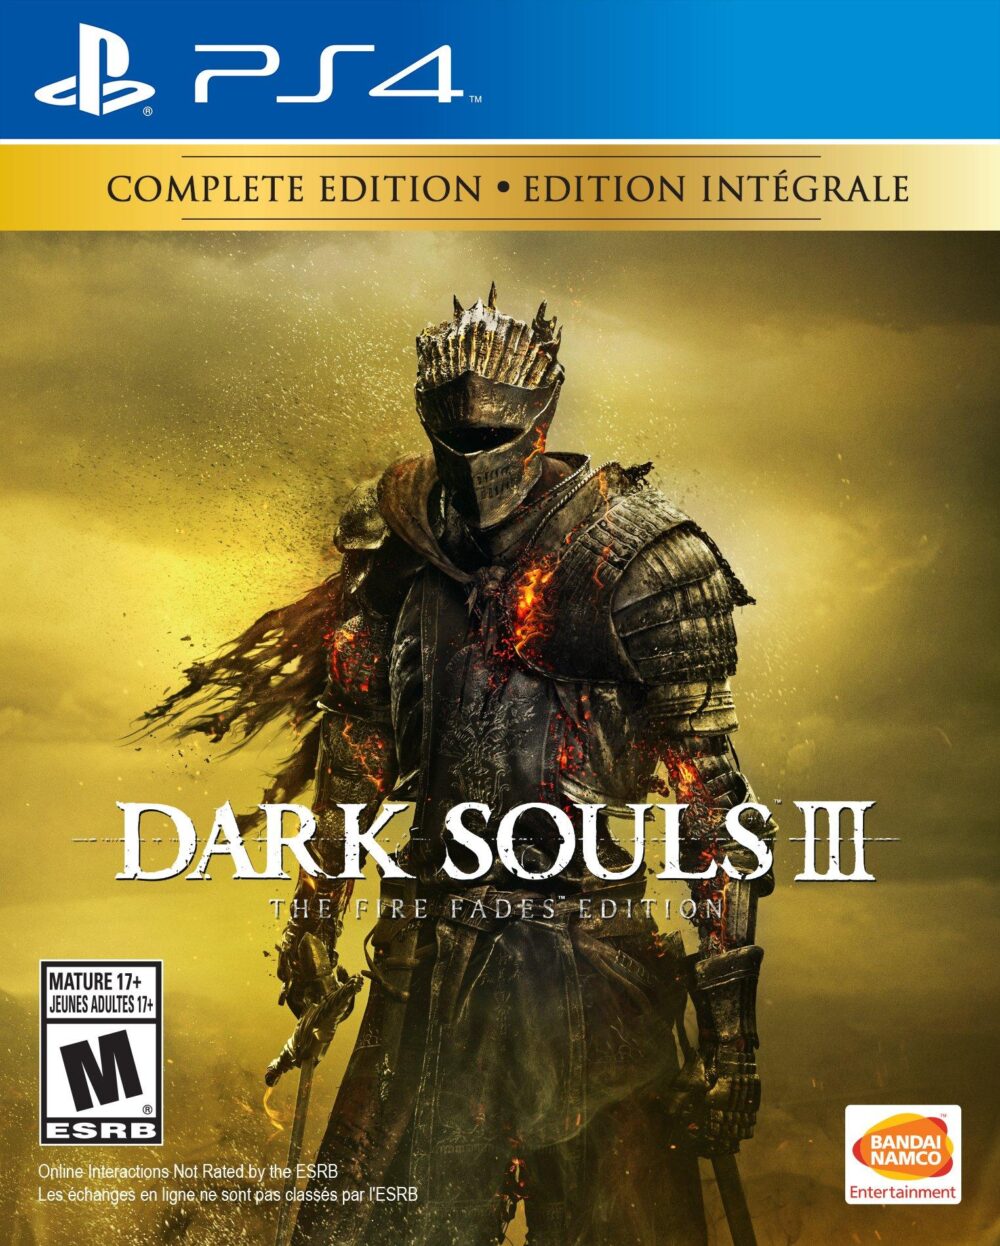 Dark Souls III (Complete Edition) for PS4